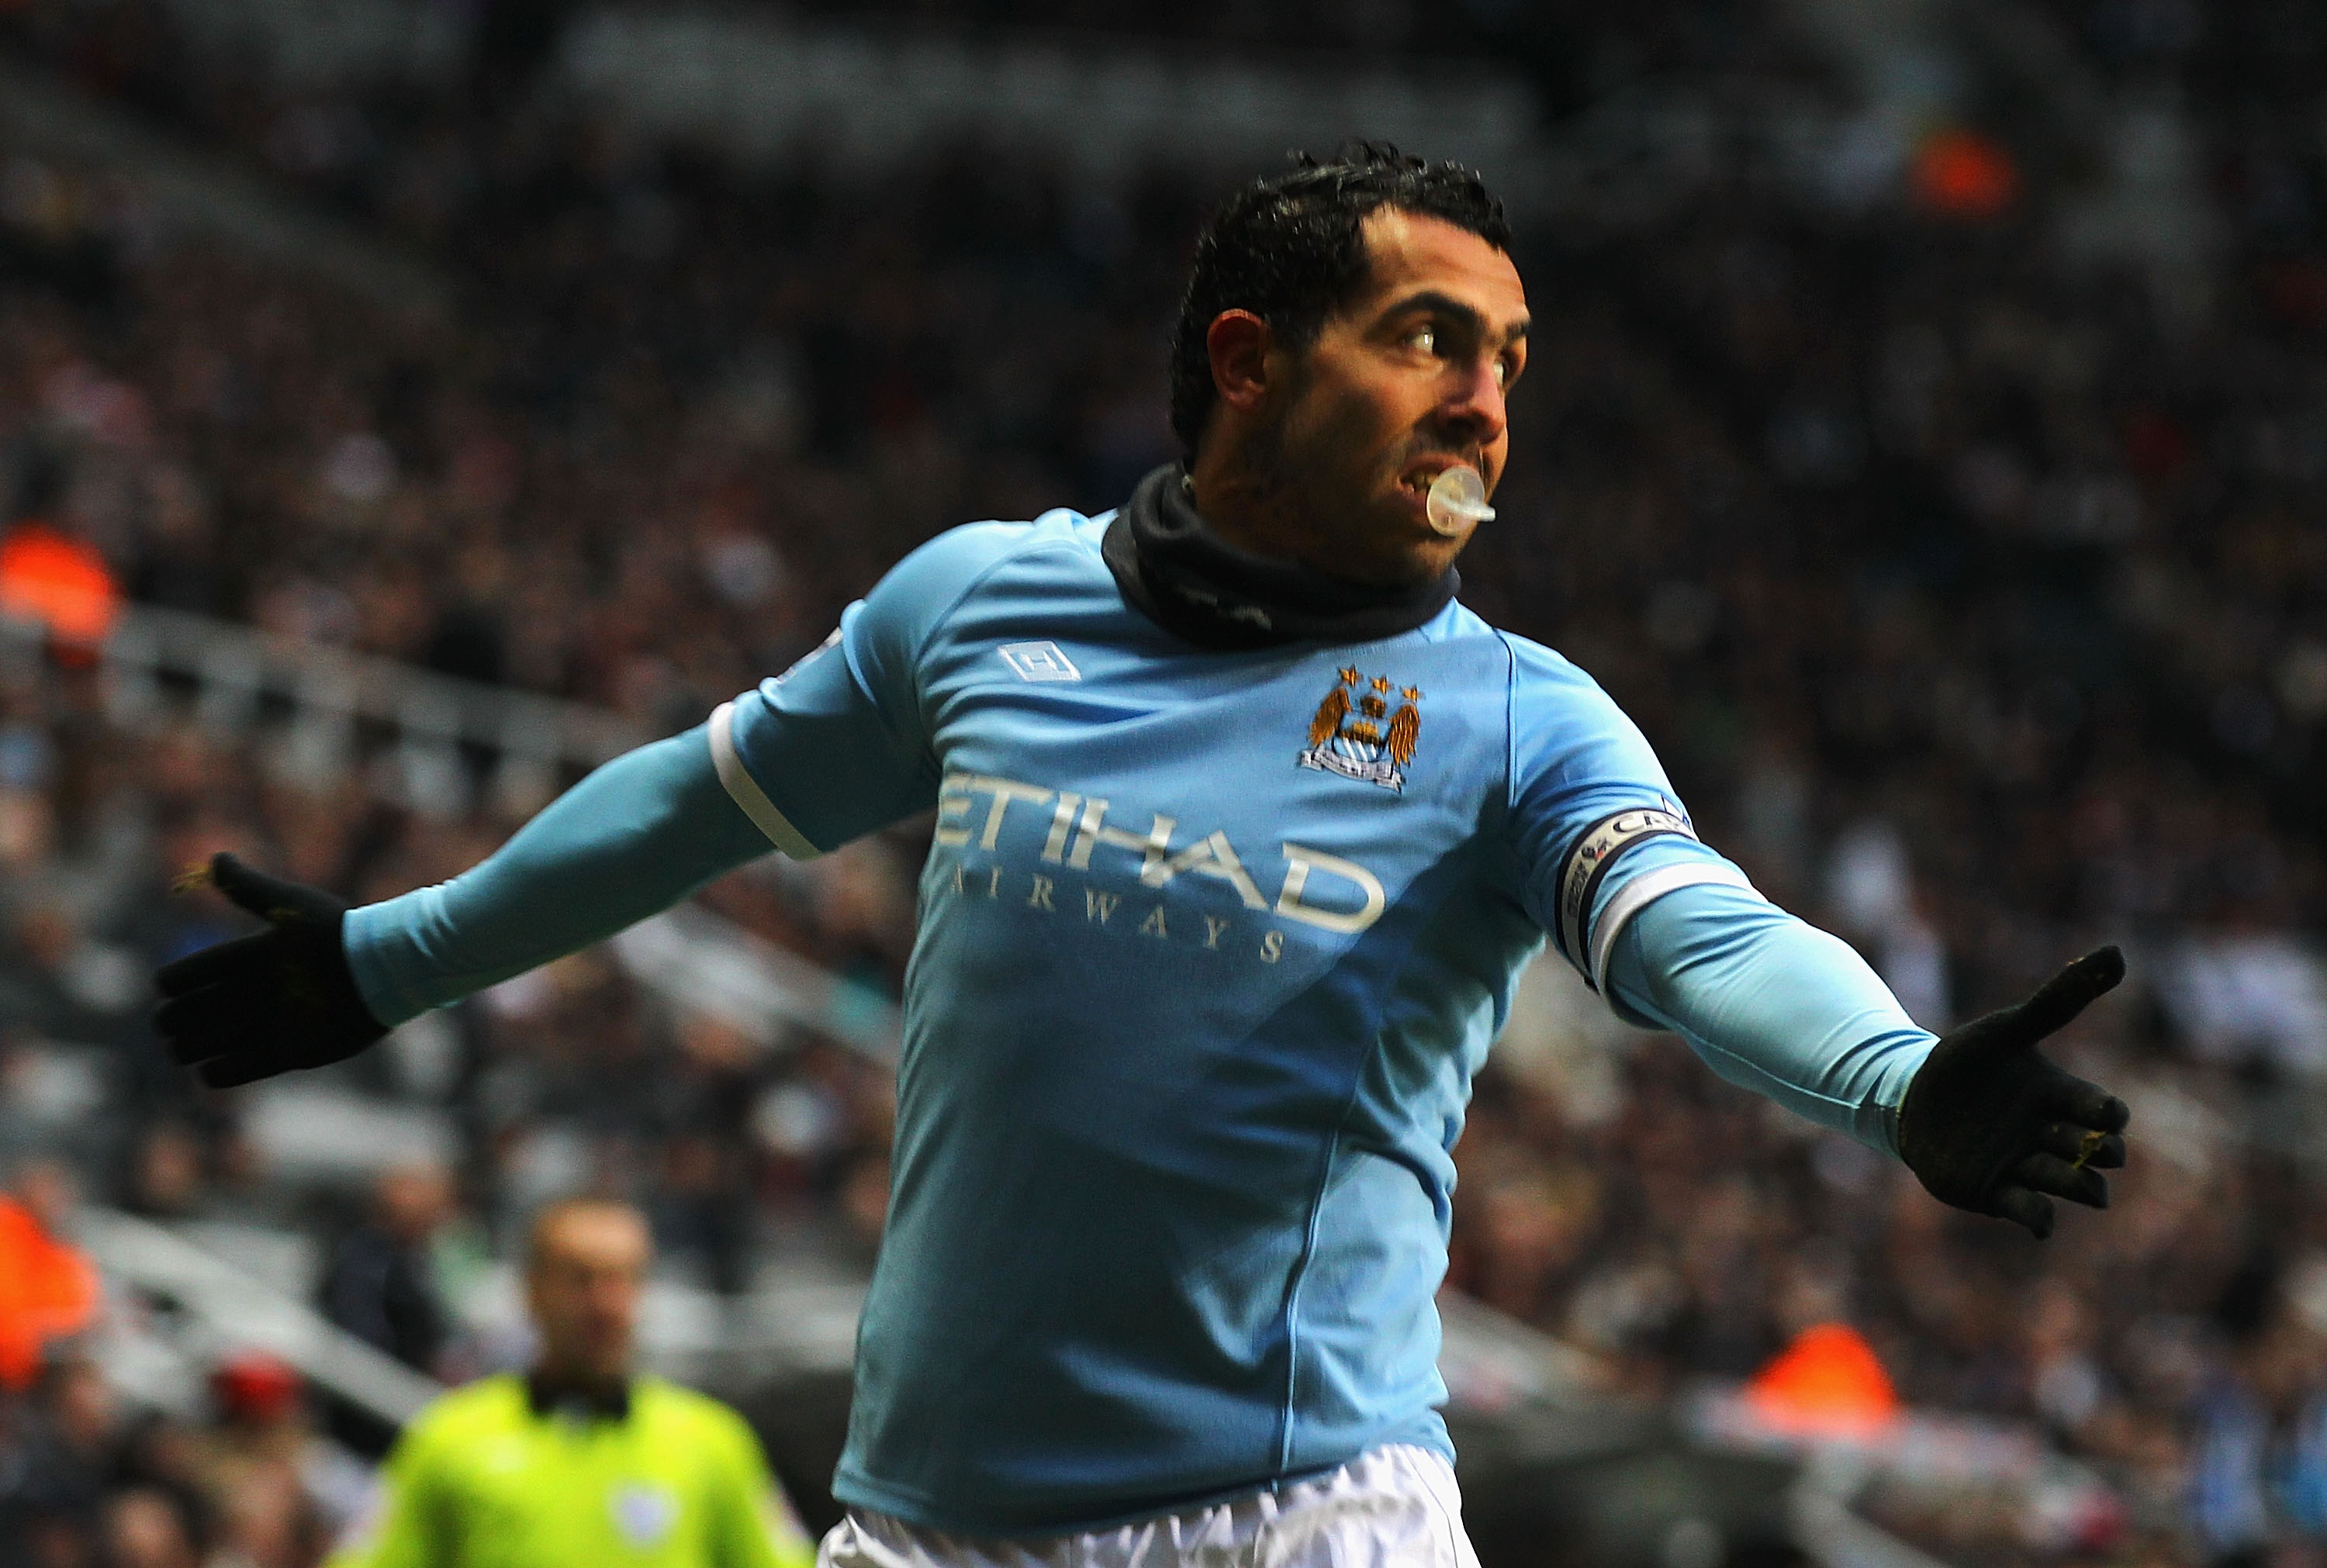 NEWCASTLE UPON TYNE, ENGLAND - DECEMBER 26:  Carlos Tevez of Manchester City celebrates his goal during the Barclays Premier League match between Newcastle United and Manchester City at St James' Park on December 26, 2010 in Newcastle upon Tyne, England.